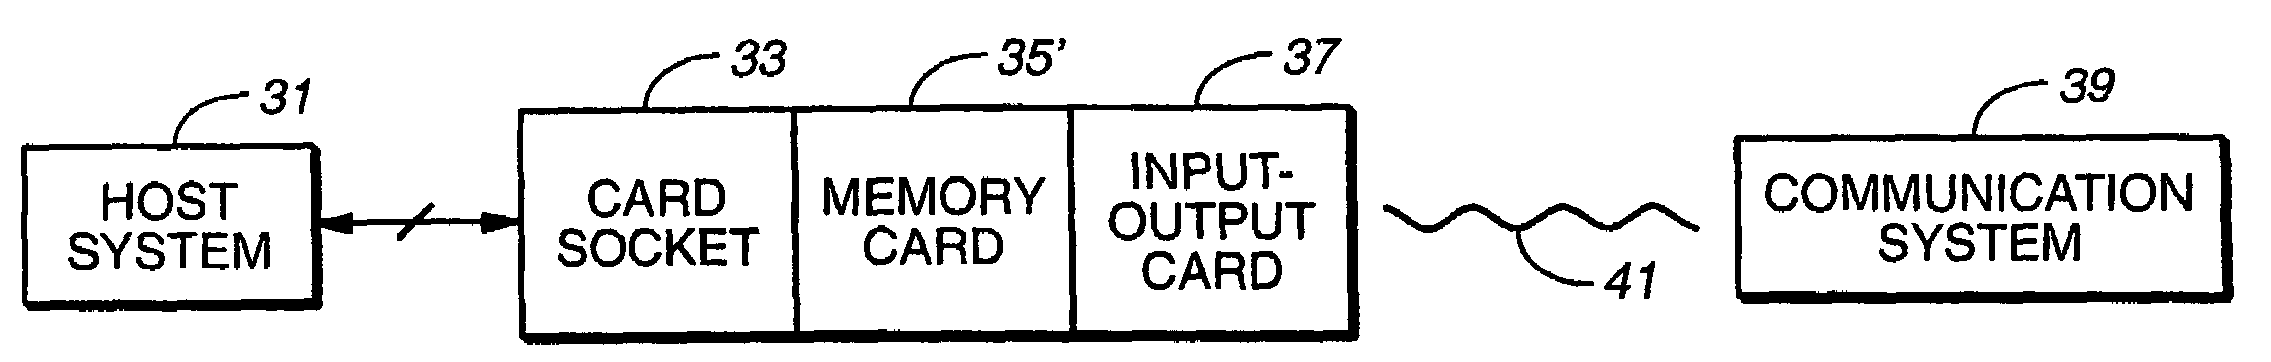 Cooperative interconnection and operation of a non-volatile memory card and an input-output card